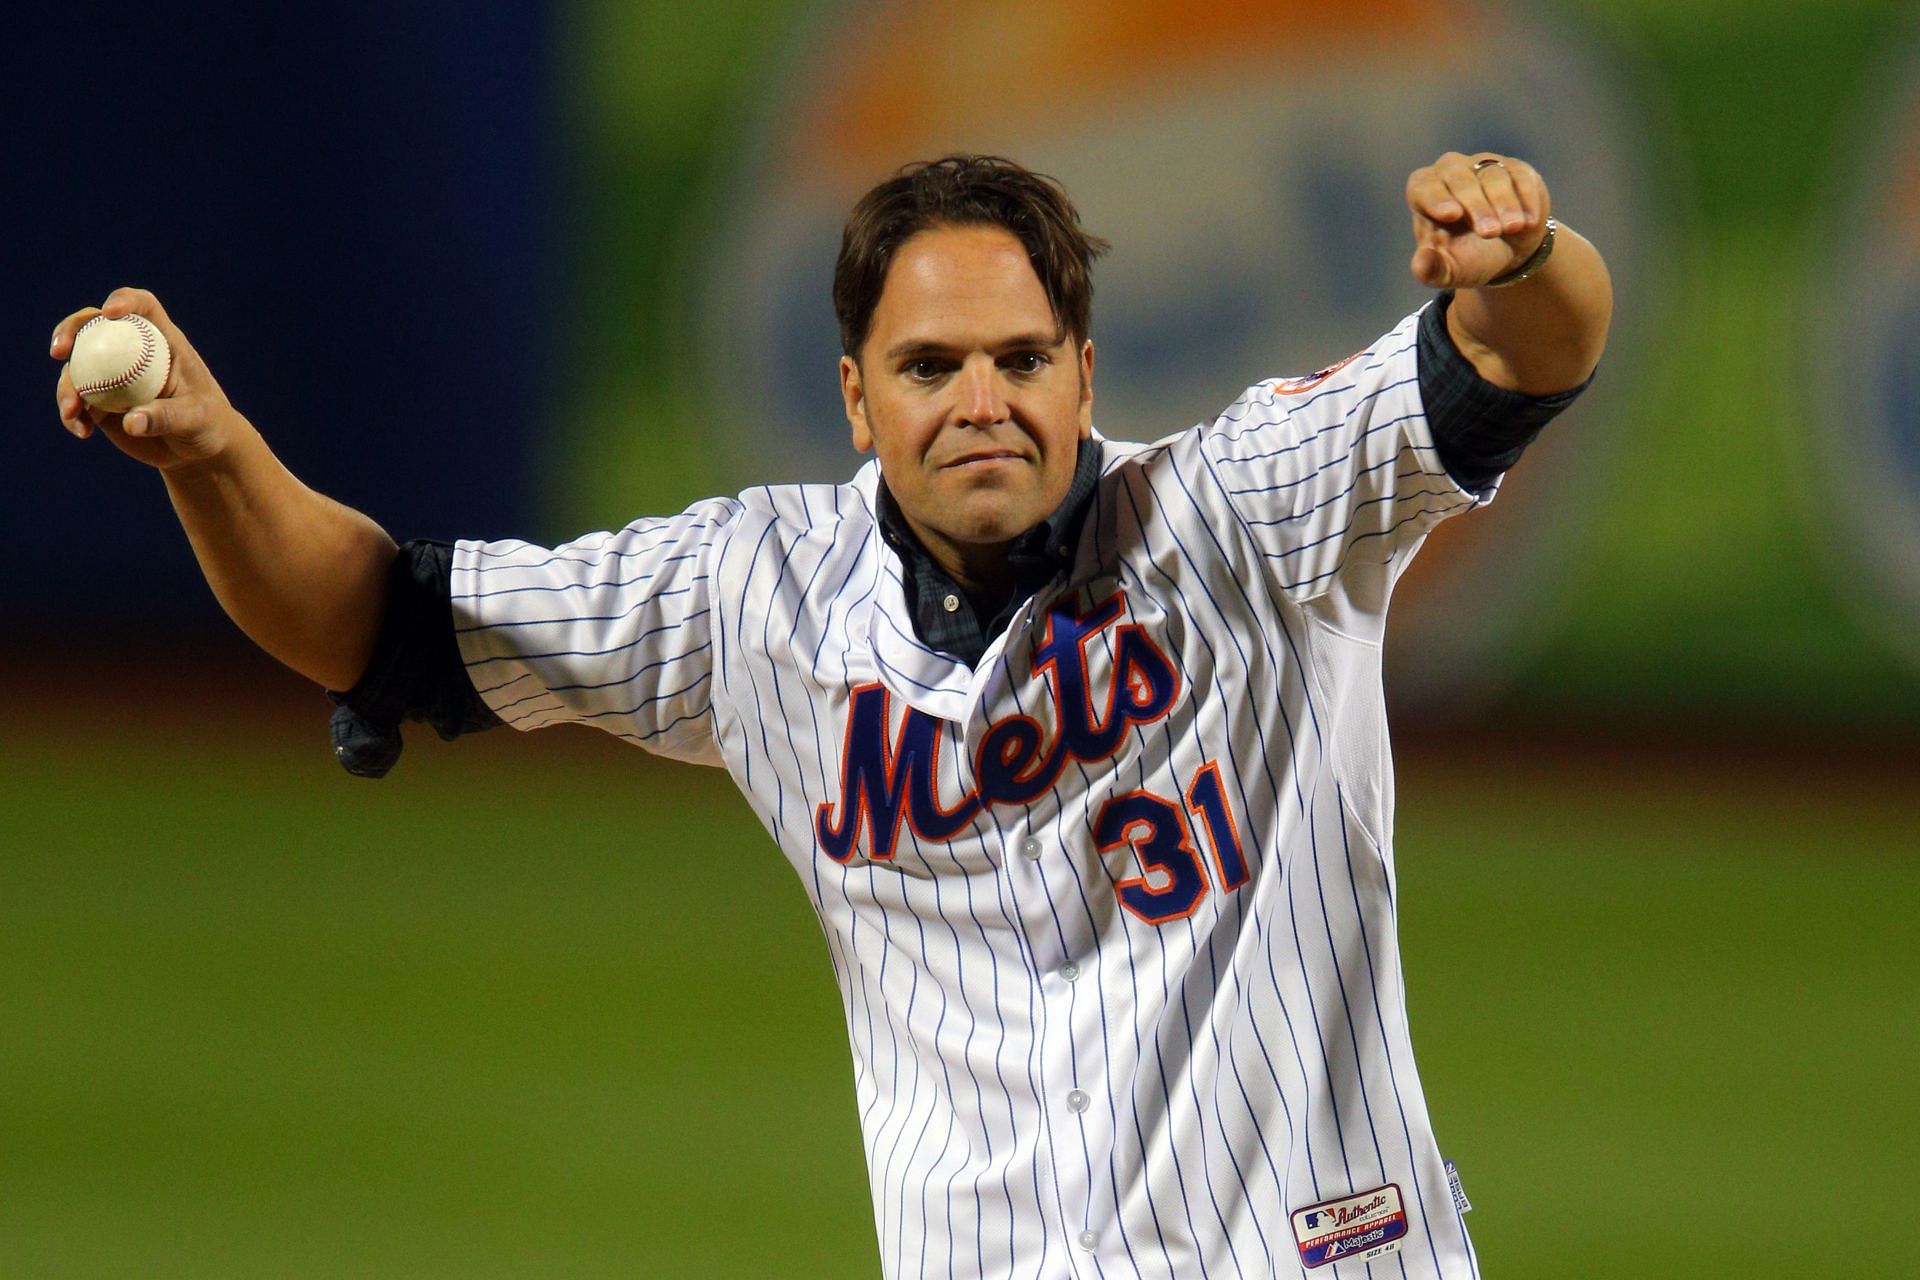 Hall of Famer Mike Piazza to manage Italy when World Baseball Classic  returns in 2023 